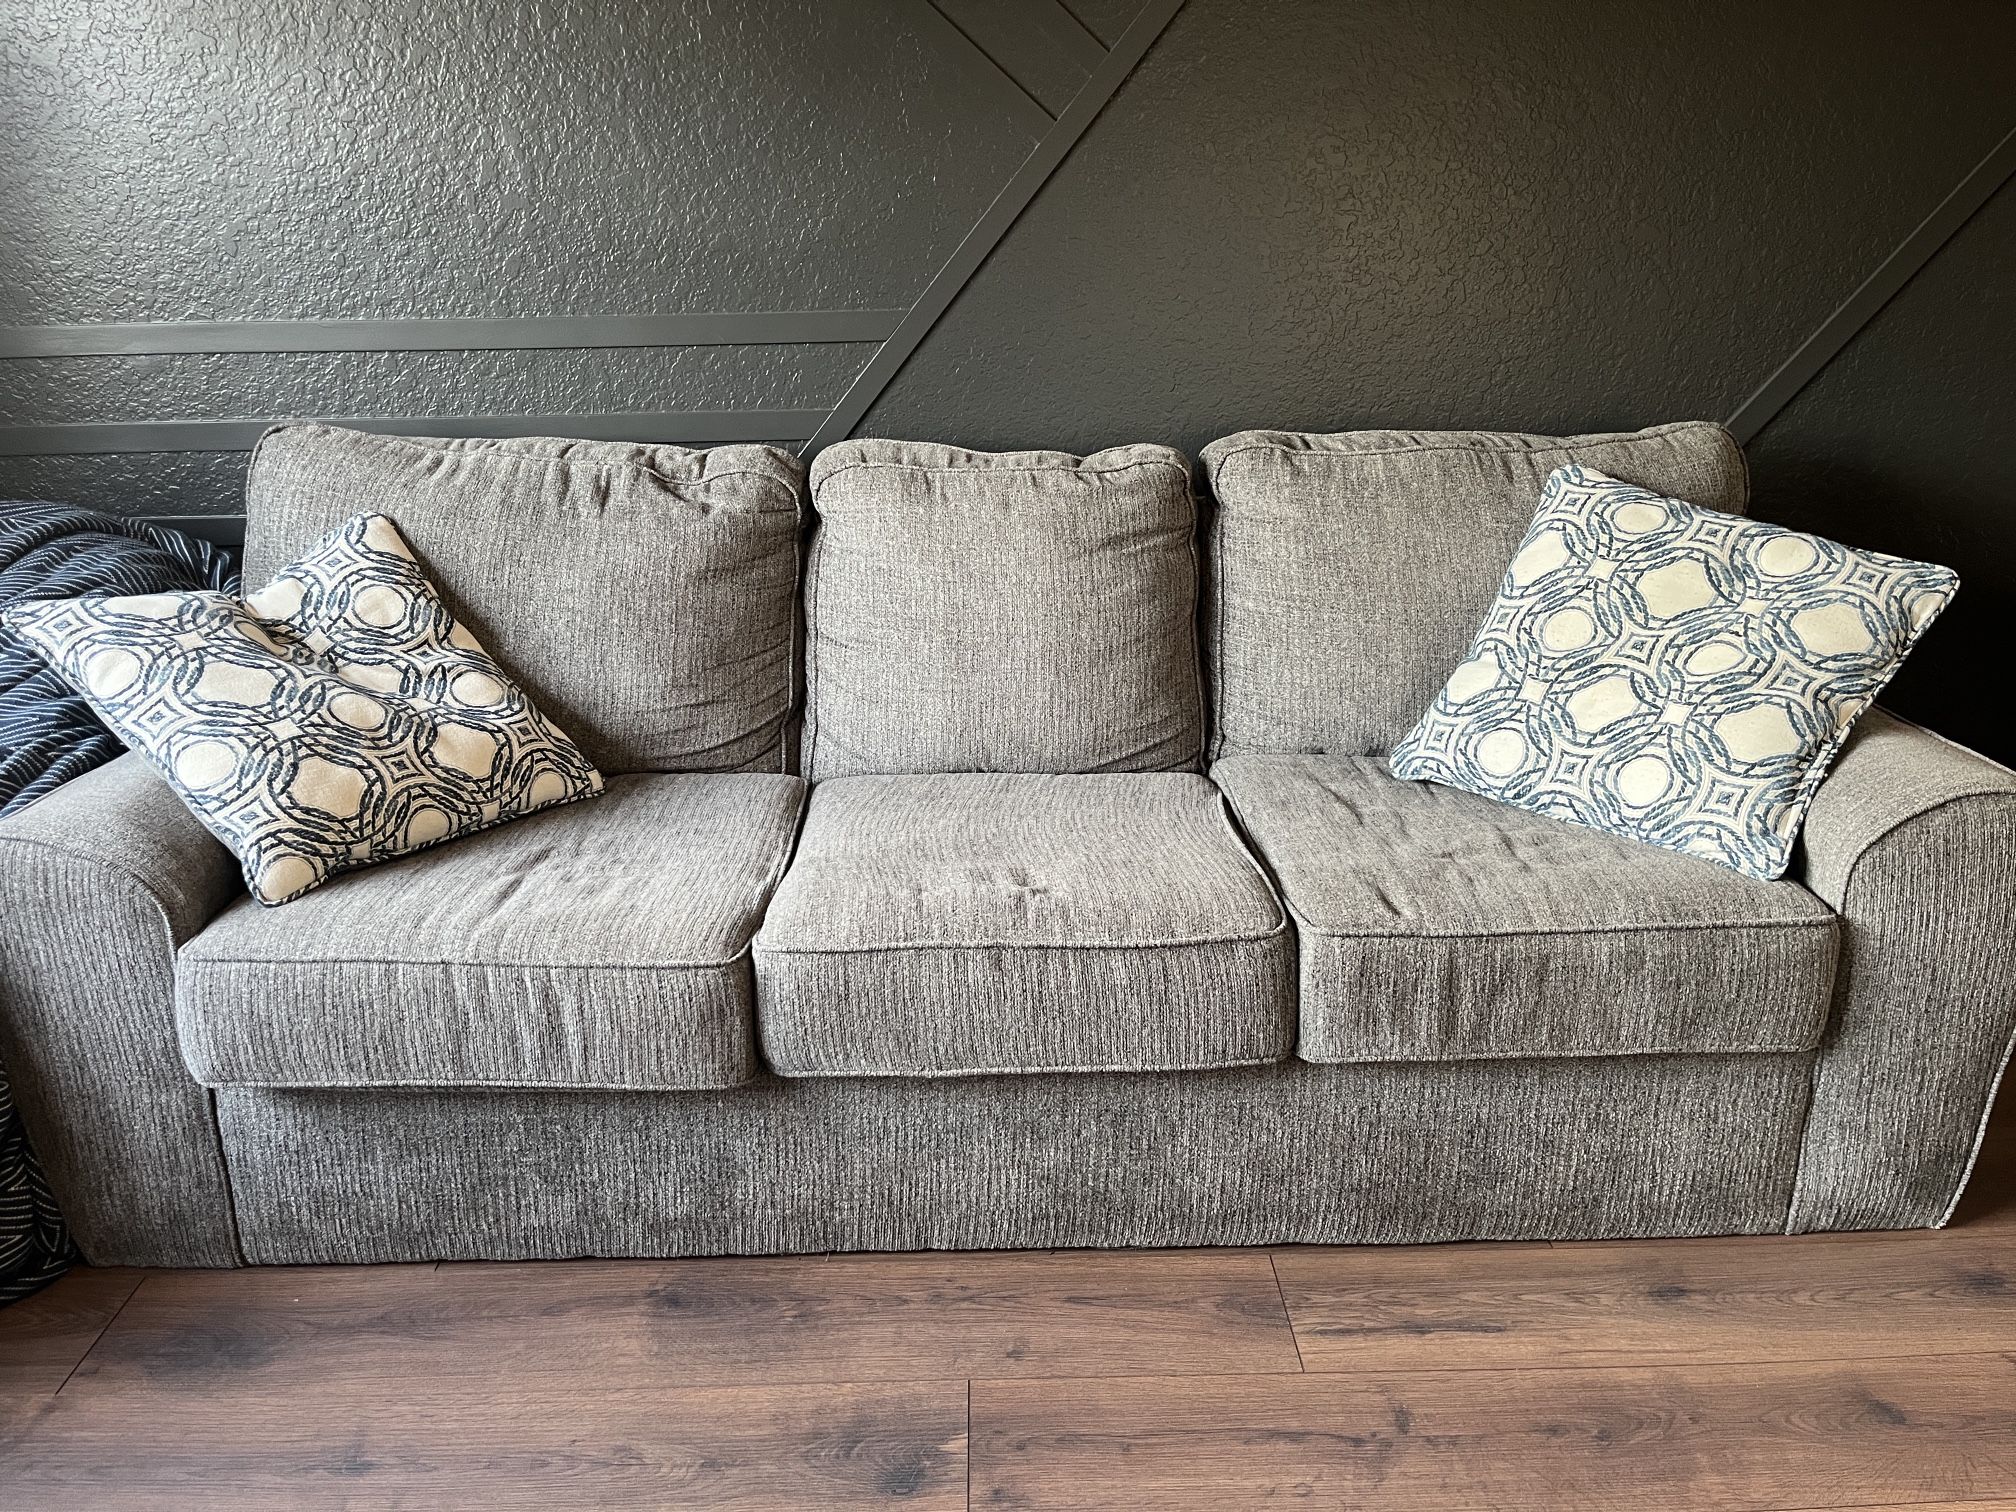 FREE, PICKUP ASAP: Gray Couch With Accent Pillows